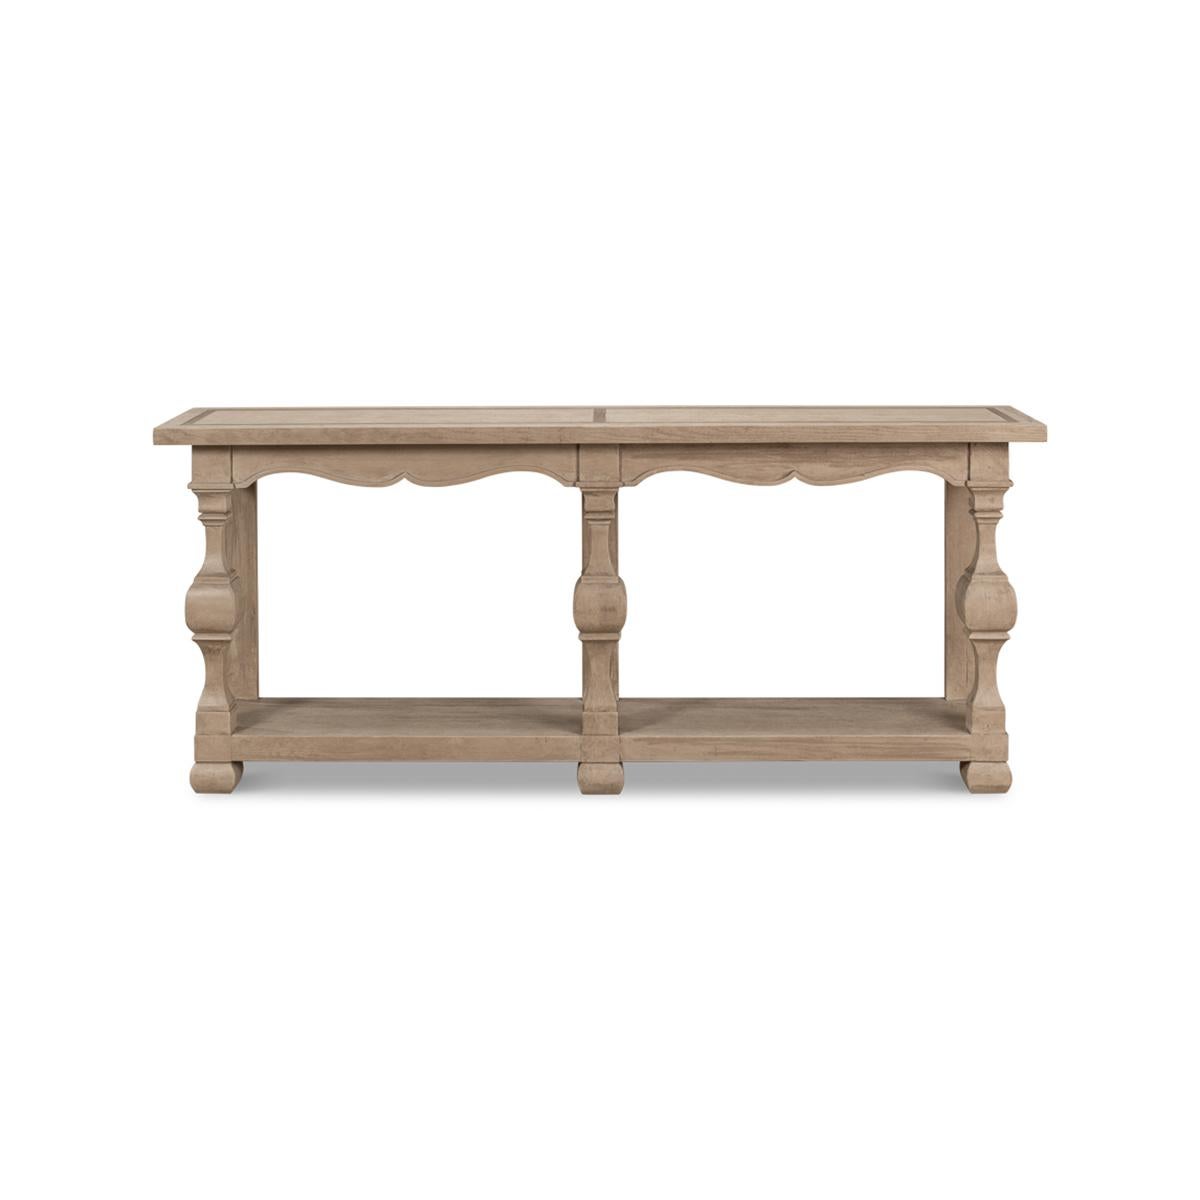 Long Transitional Console Table, made of pine and finished in barn grey. The long rectangular console with a banded top on six legs, the front squared baluster form above a long shelf stretcher base.

Dimensions: 80